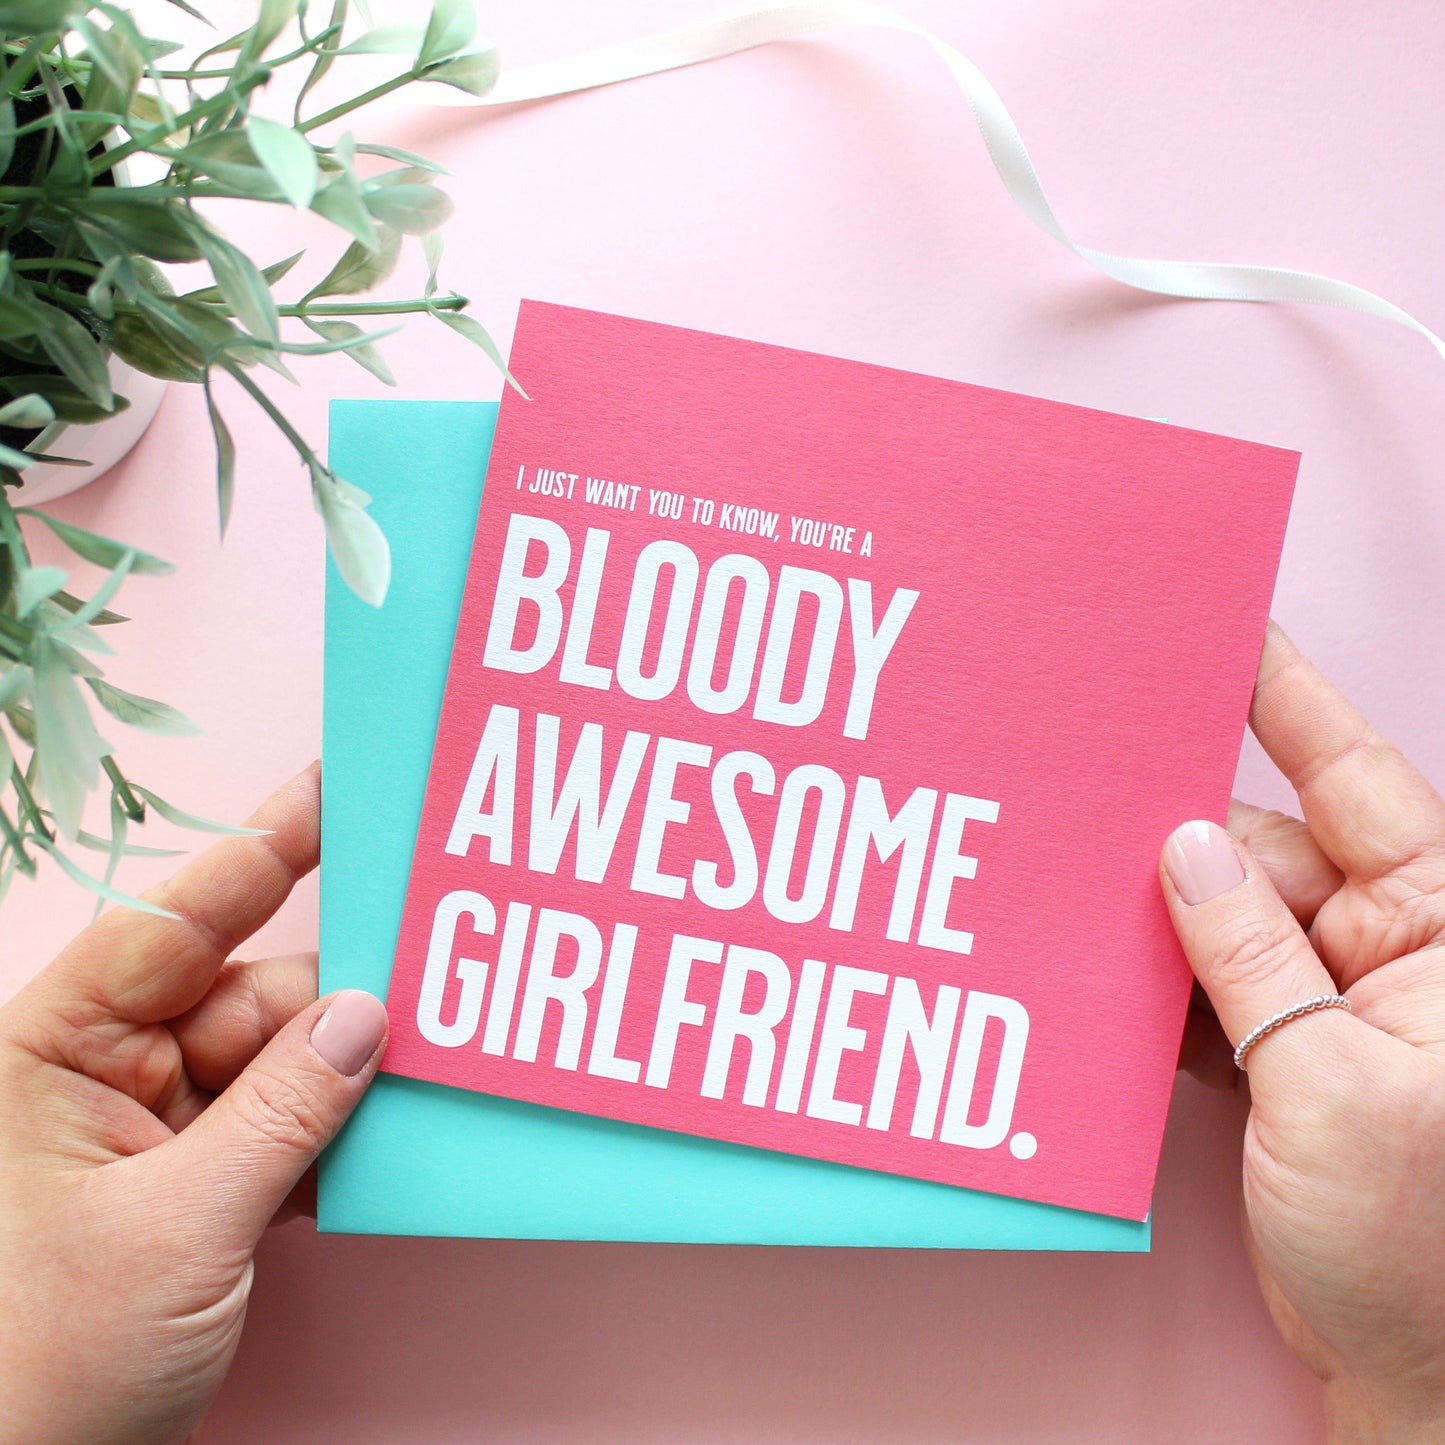 Bloody awesome girlfriend card from Purple Tree Designs